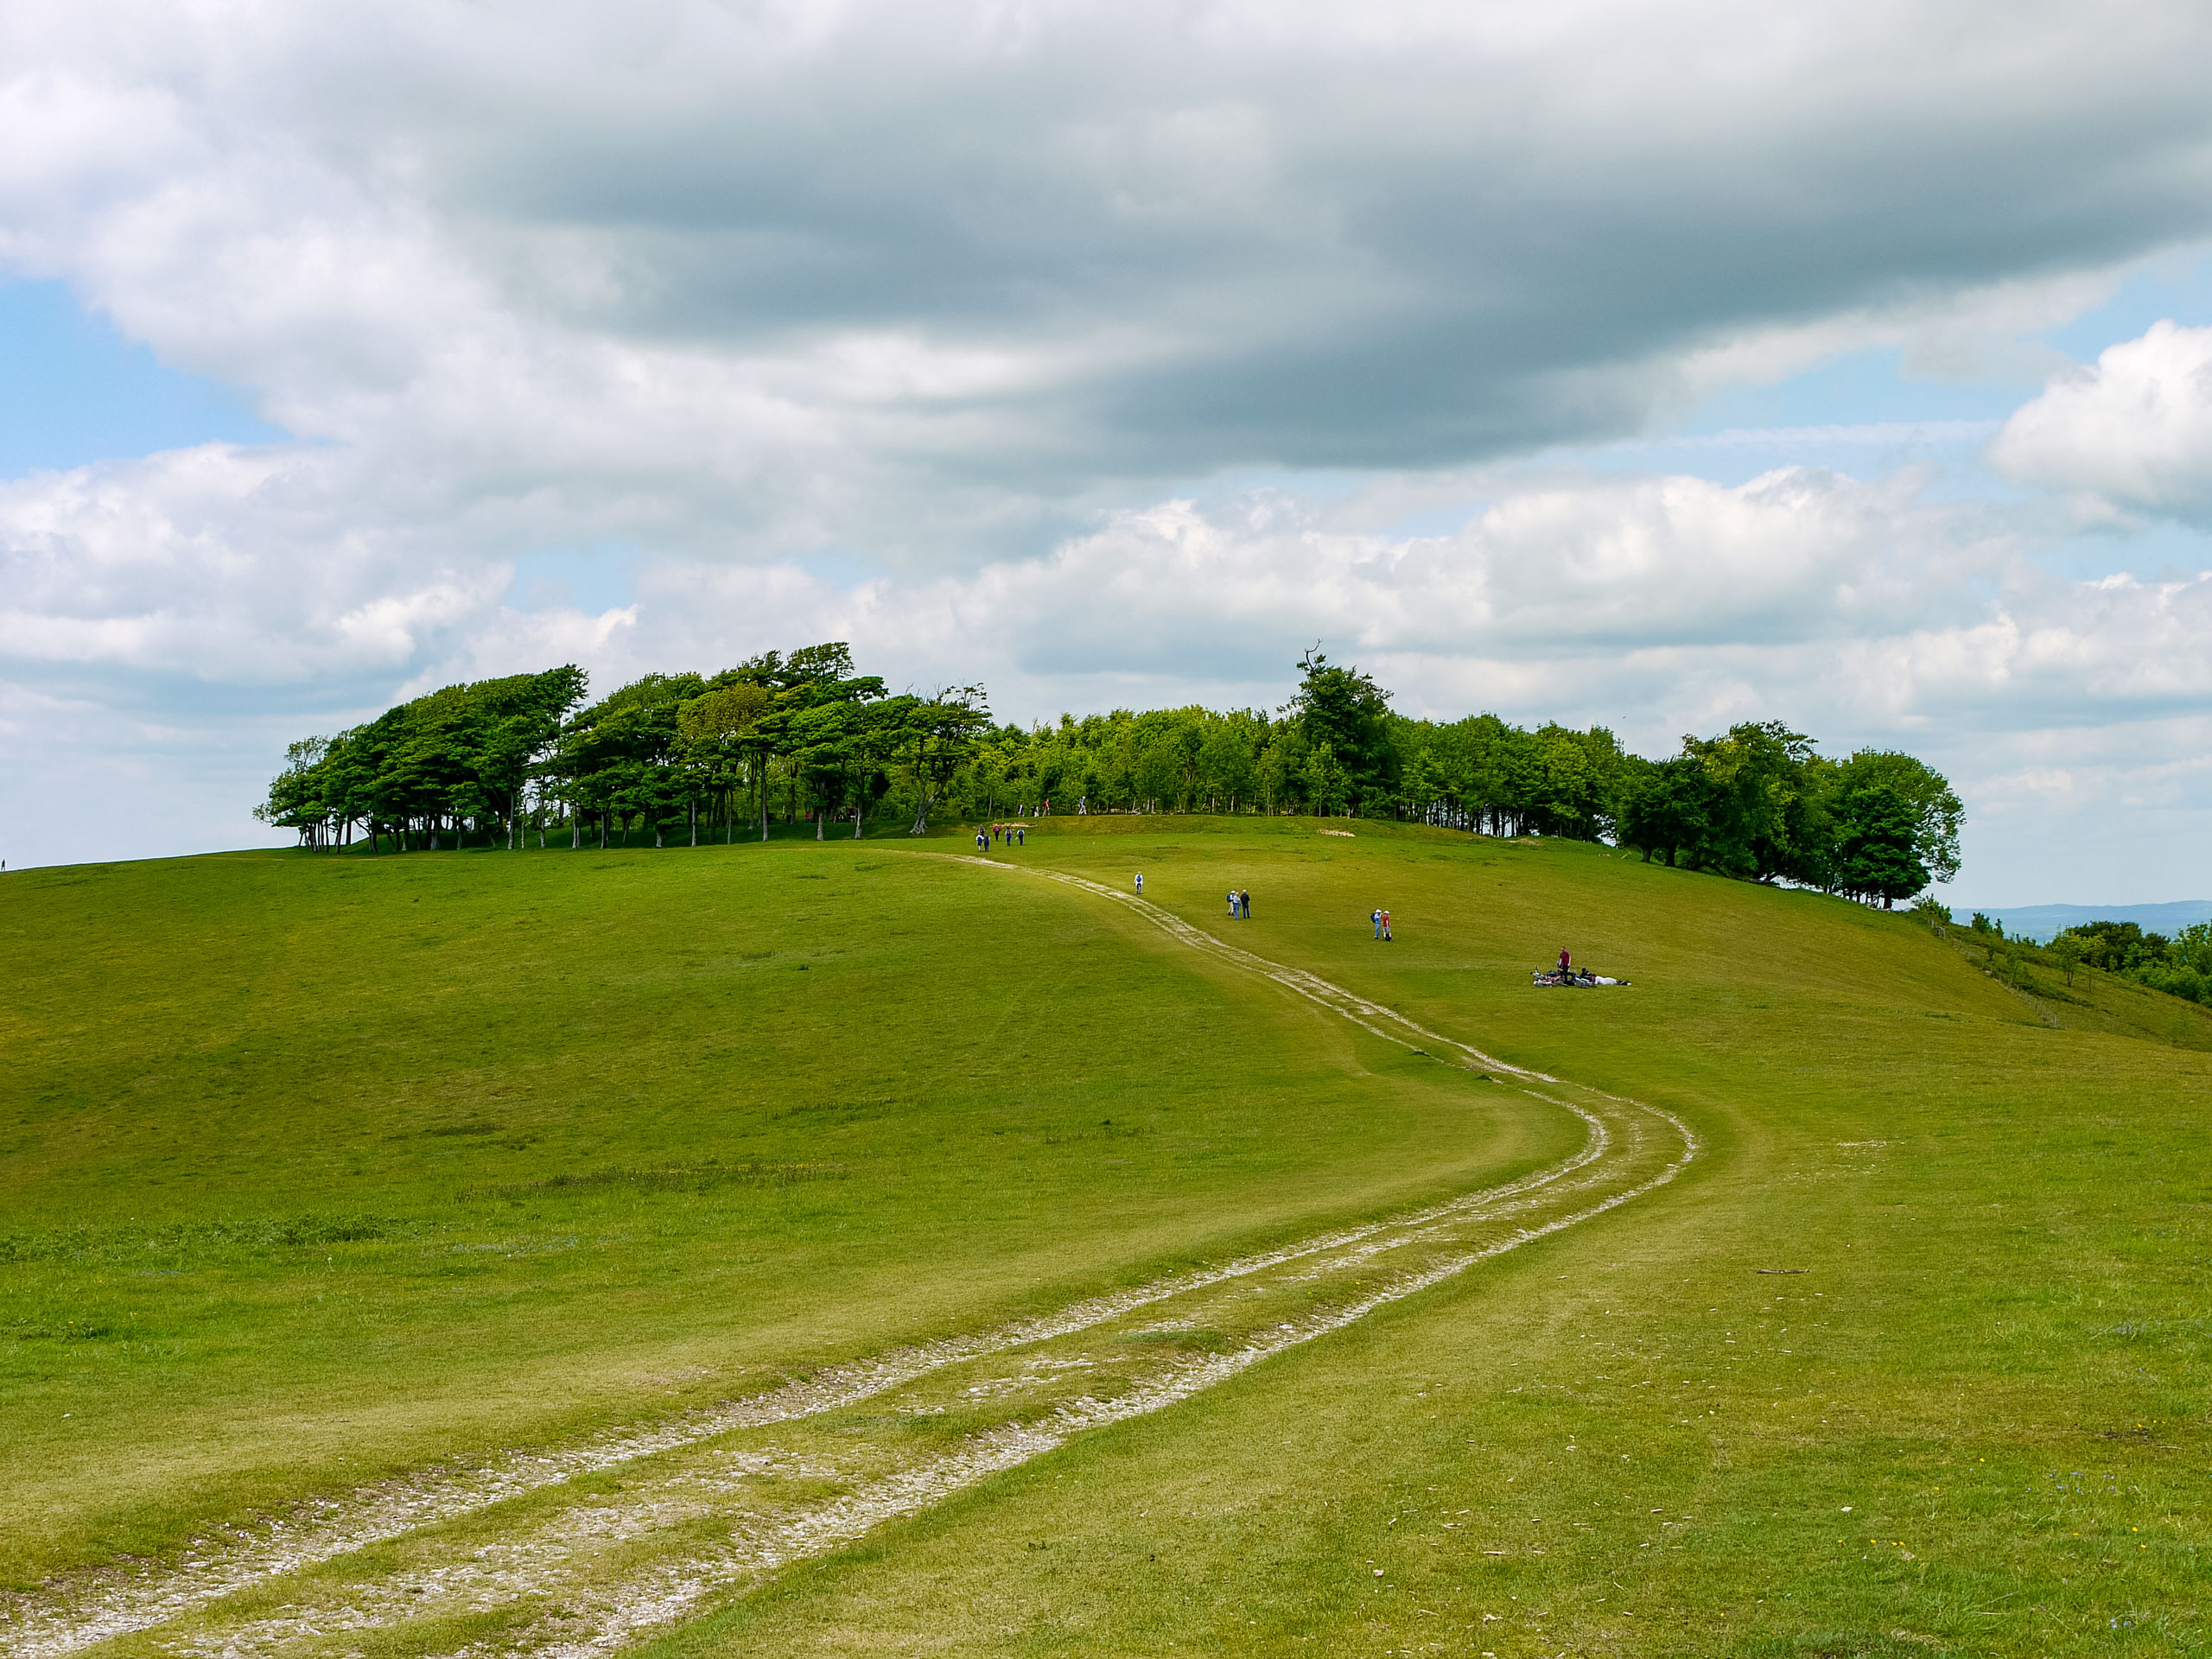 Chanctonbury Ring An Iron Age hill fort with a ring of 17th century trees